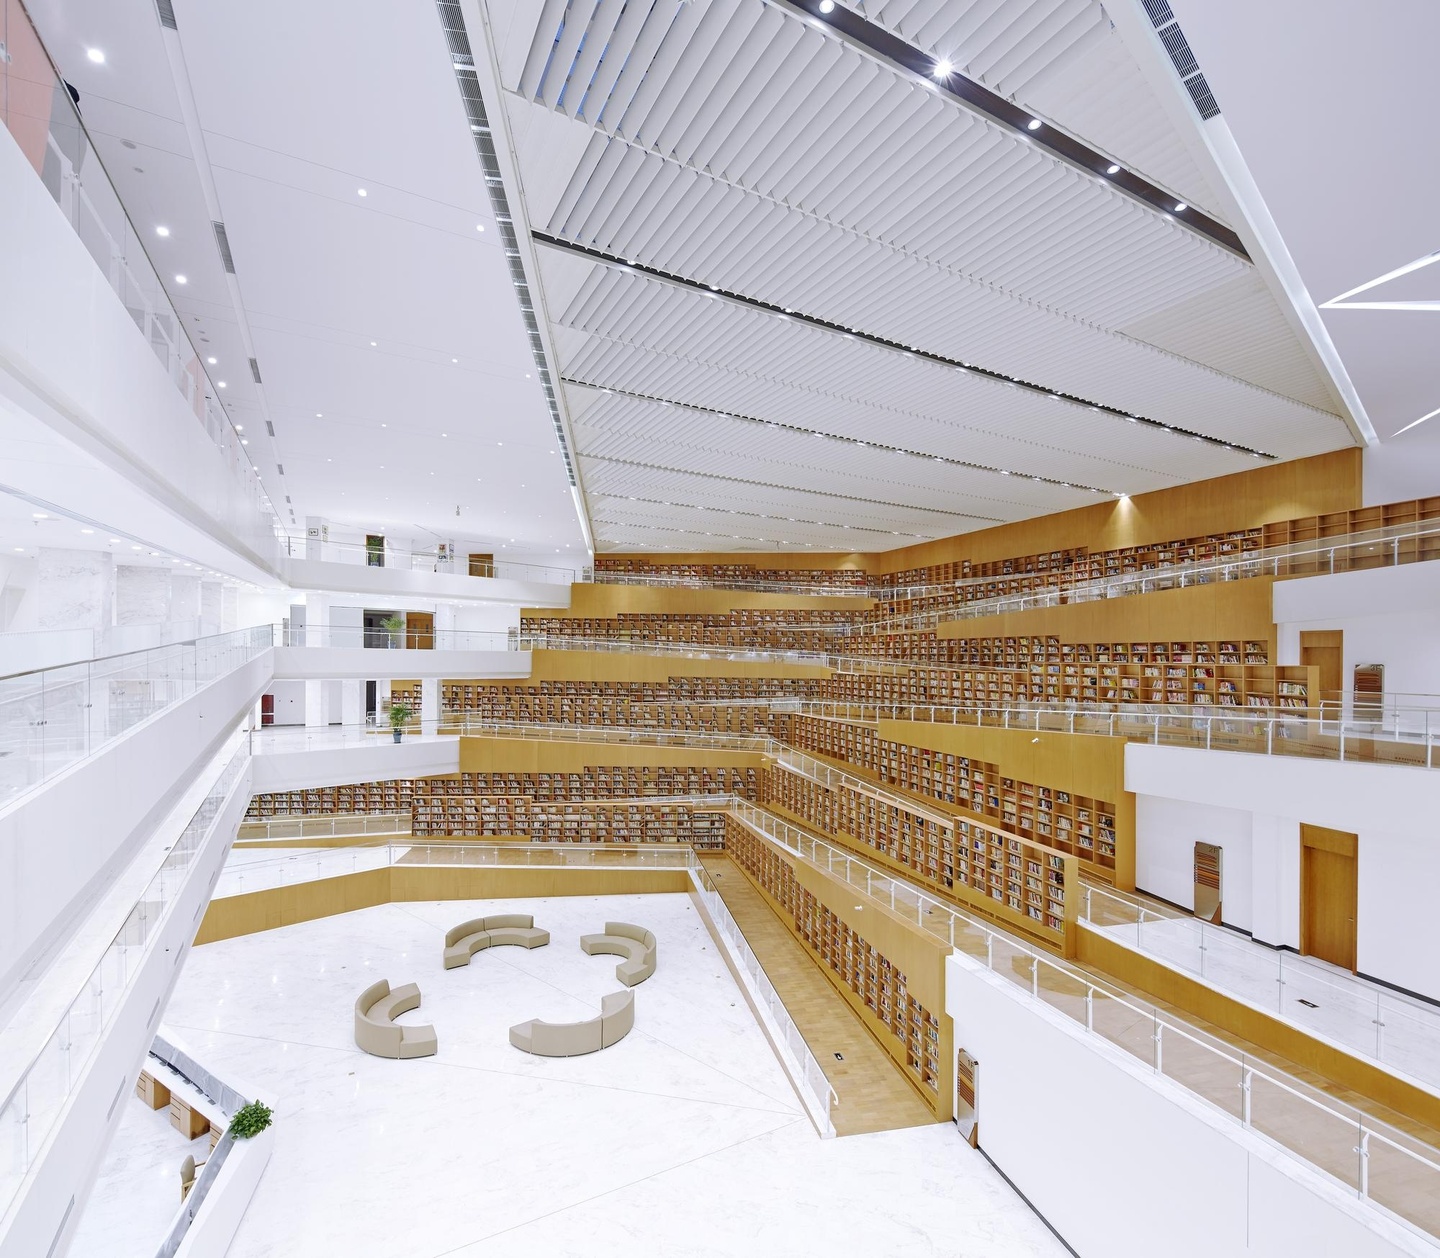 Image of building interior with tiered levels and shelving